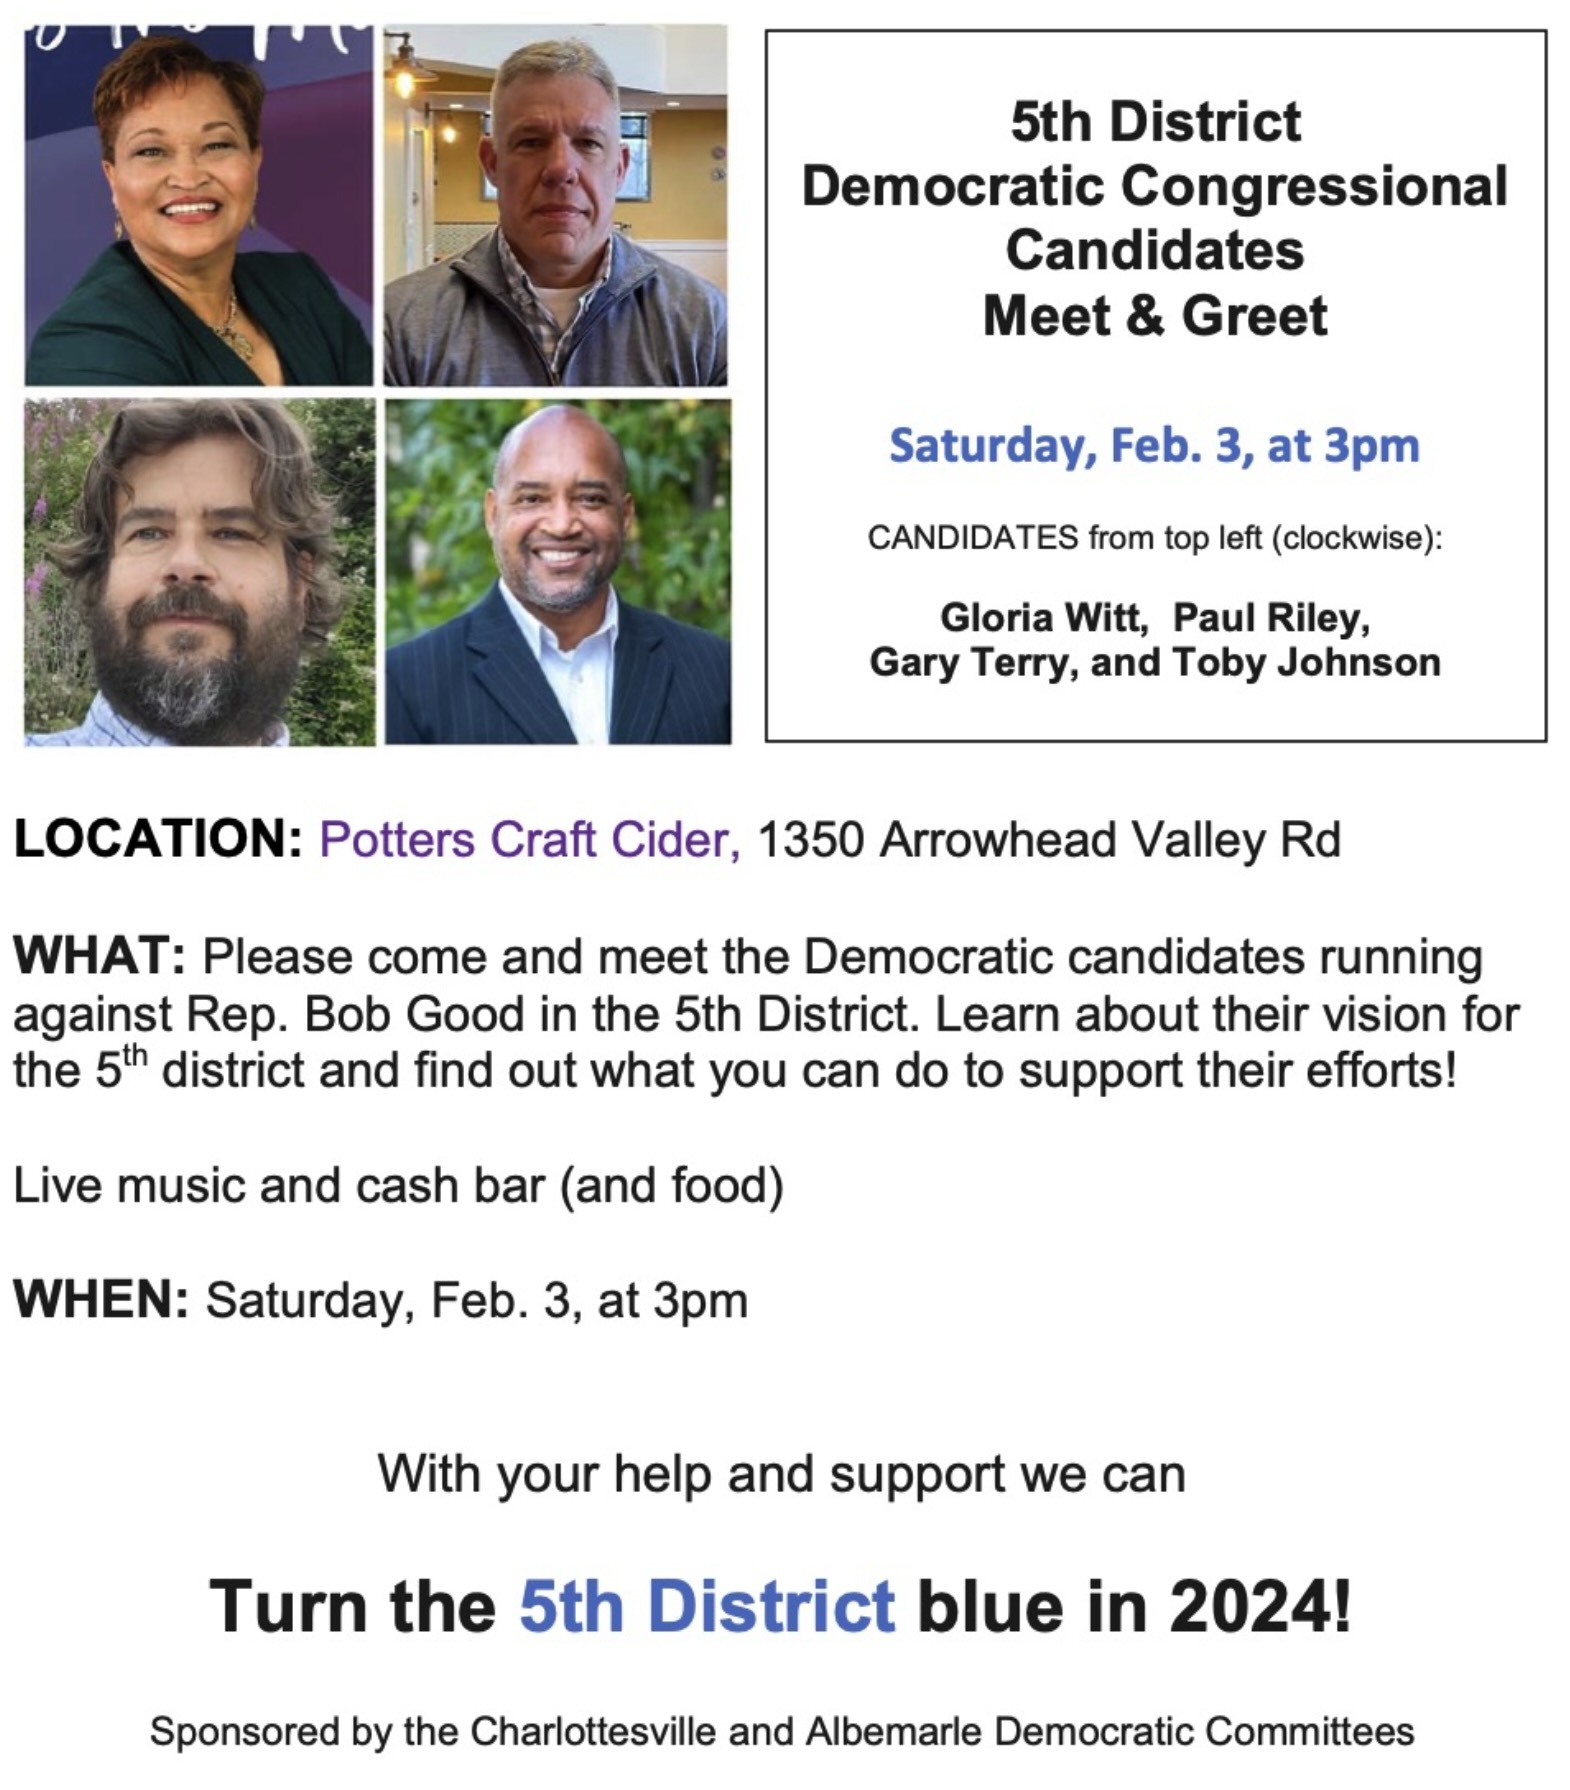 Flyer for the Feb 3, 2024 3pm 5th District "Meet and Greet" event with details about the event location and 4 small headshot photos of Gloria Witt, Paul Riley, Gary Terry, and Toby Johnson.